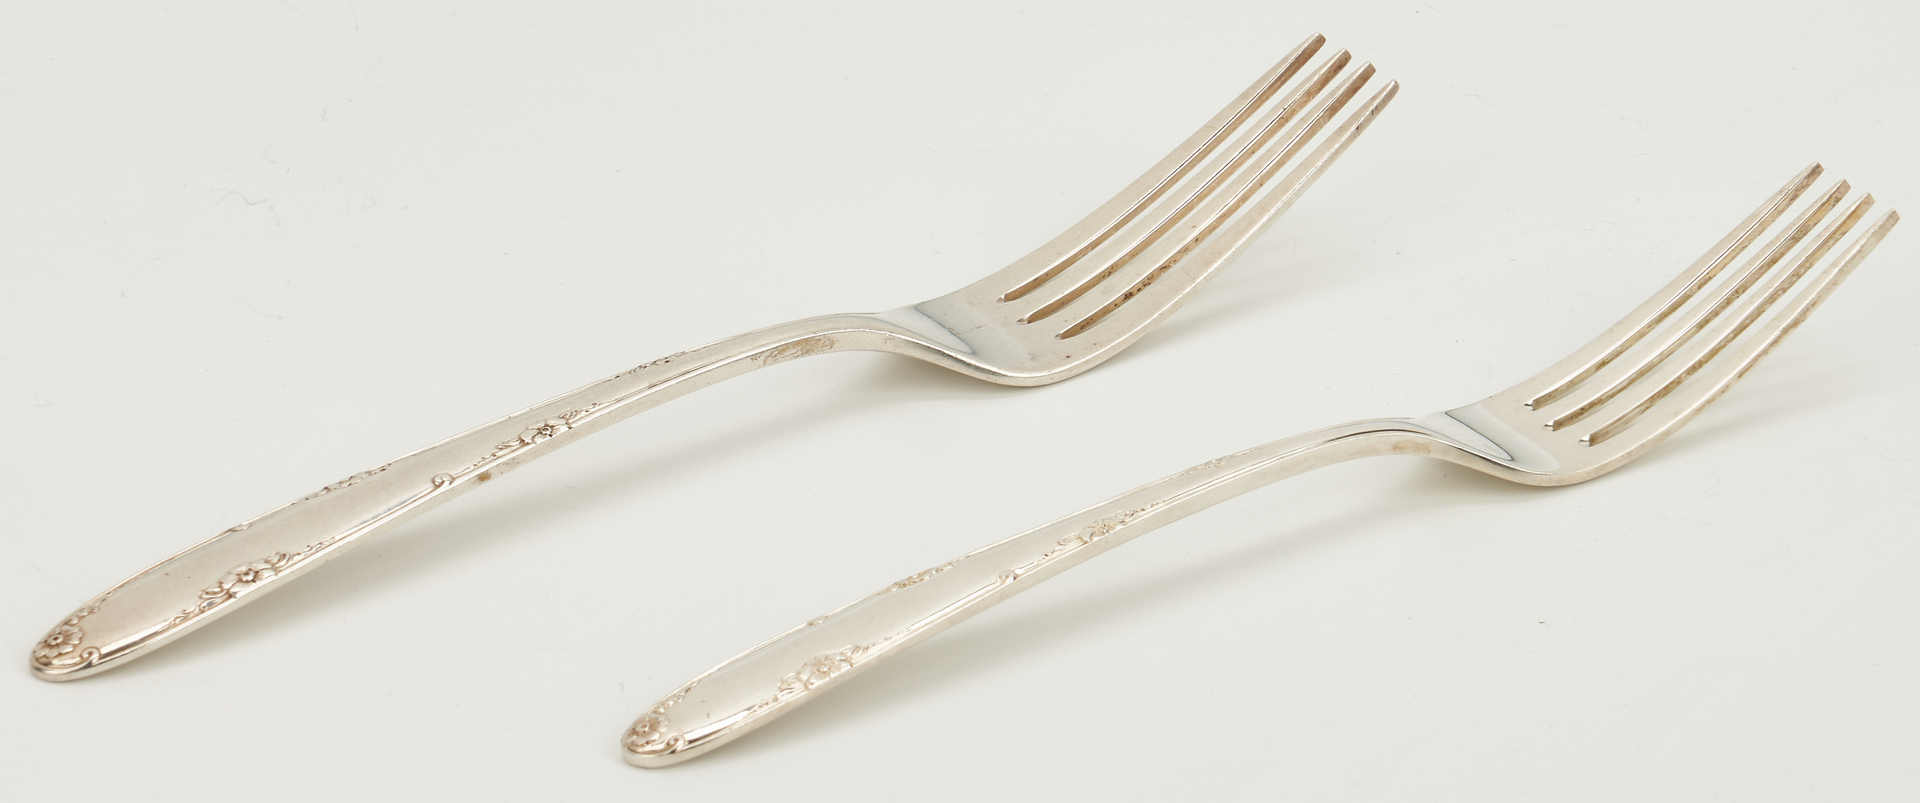 Lot 57: 192 Pcs. Towle Madeira Sterling Flatware